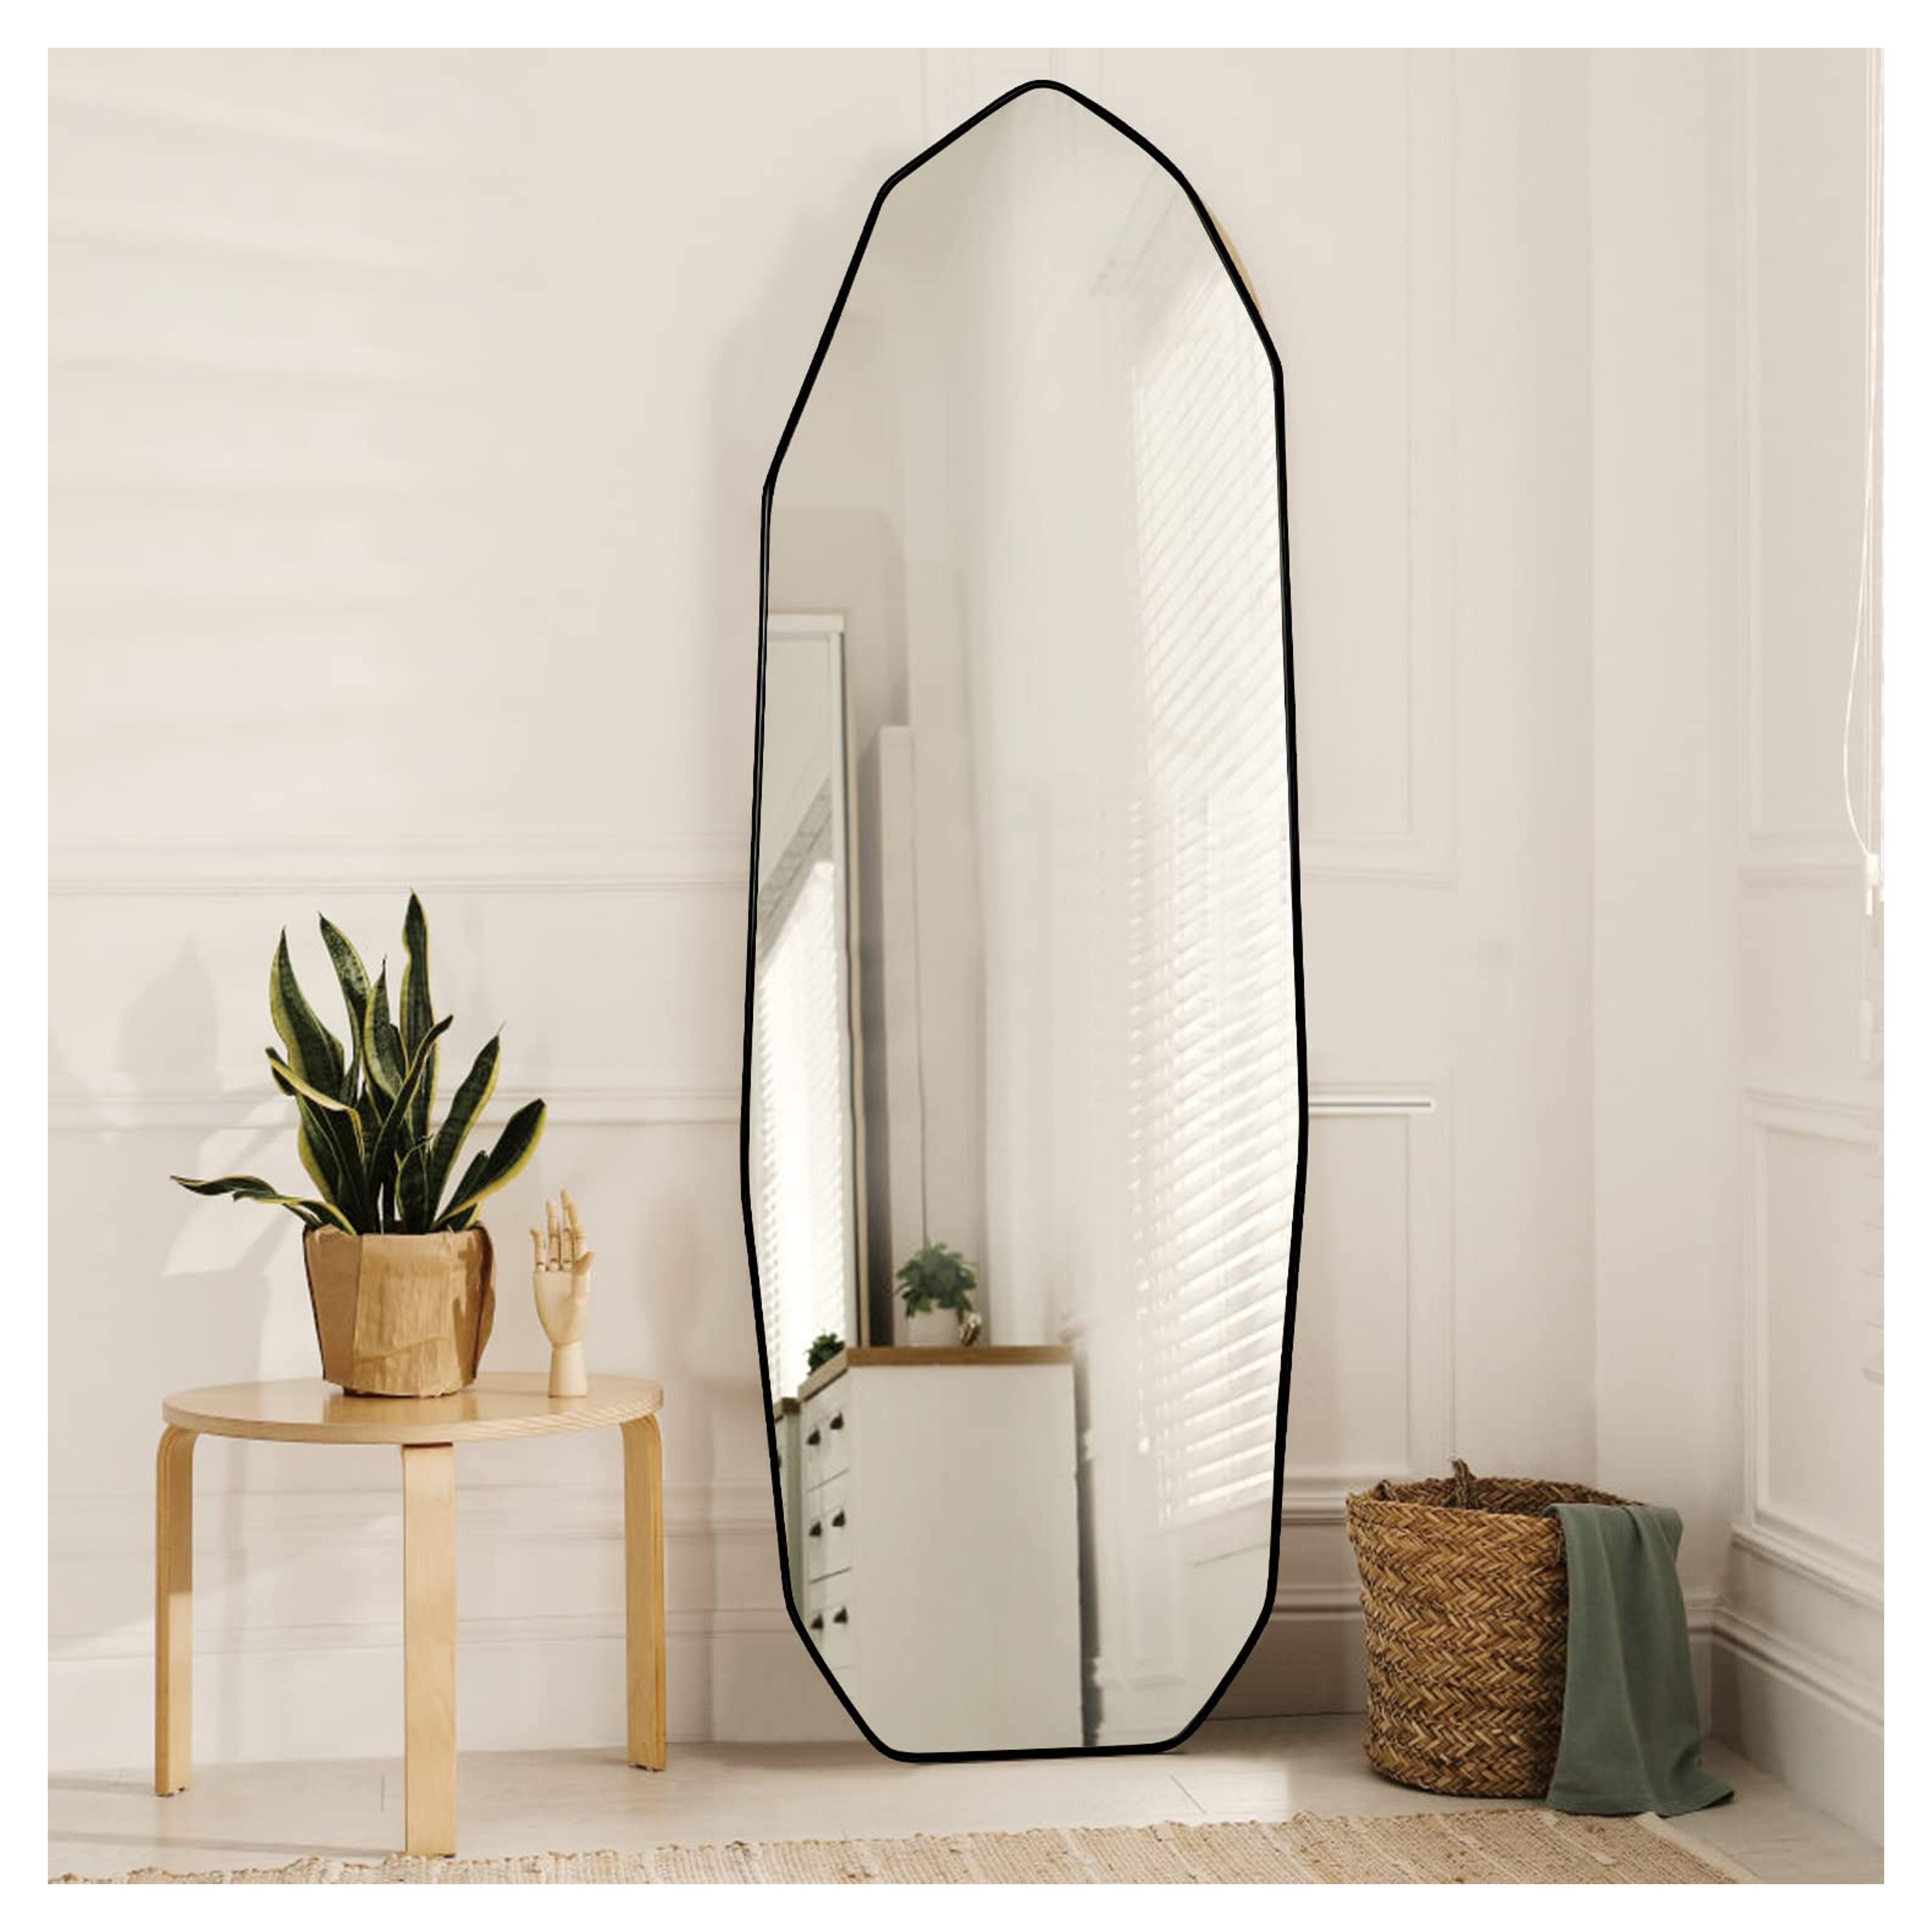 SANHUAMAO Full Length Mirror 22" x 65" Irregular Floor Length Mirror with Stand, Wall Mirror Diamond Shaped for Living Room, Bathroom, Entryway and Cloakroom, Black Aluminum Frame